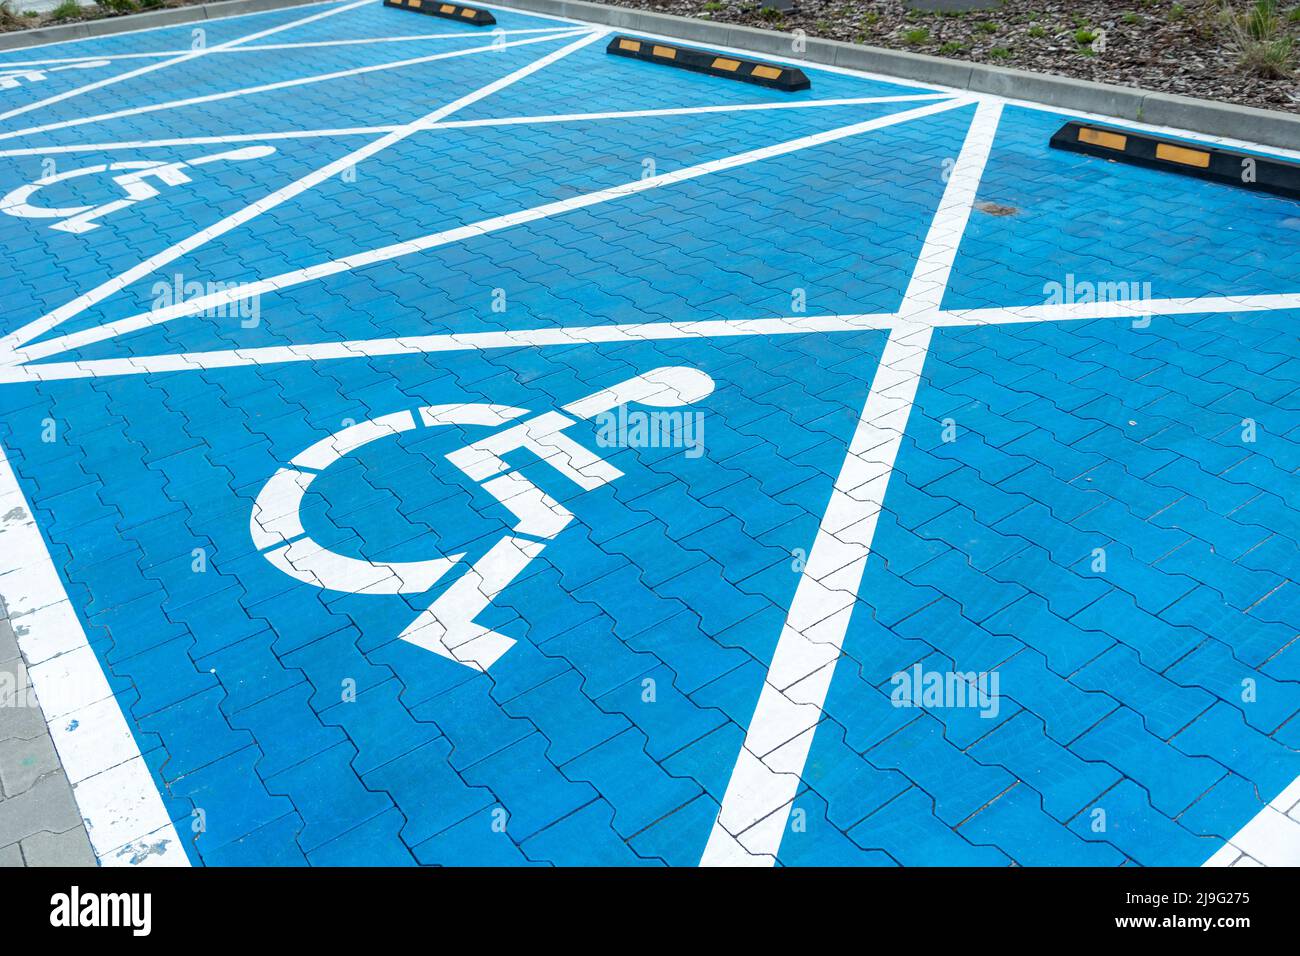 Big blue car parking spaces for disabled people Stock Photo